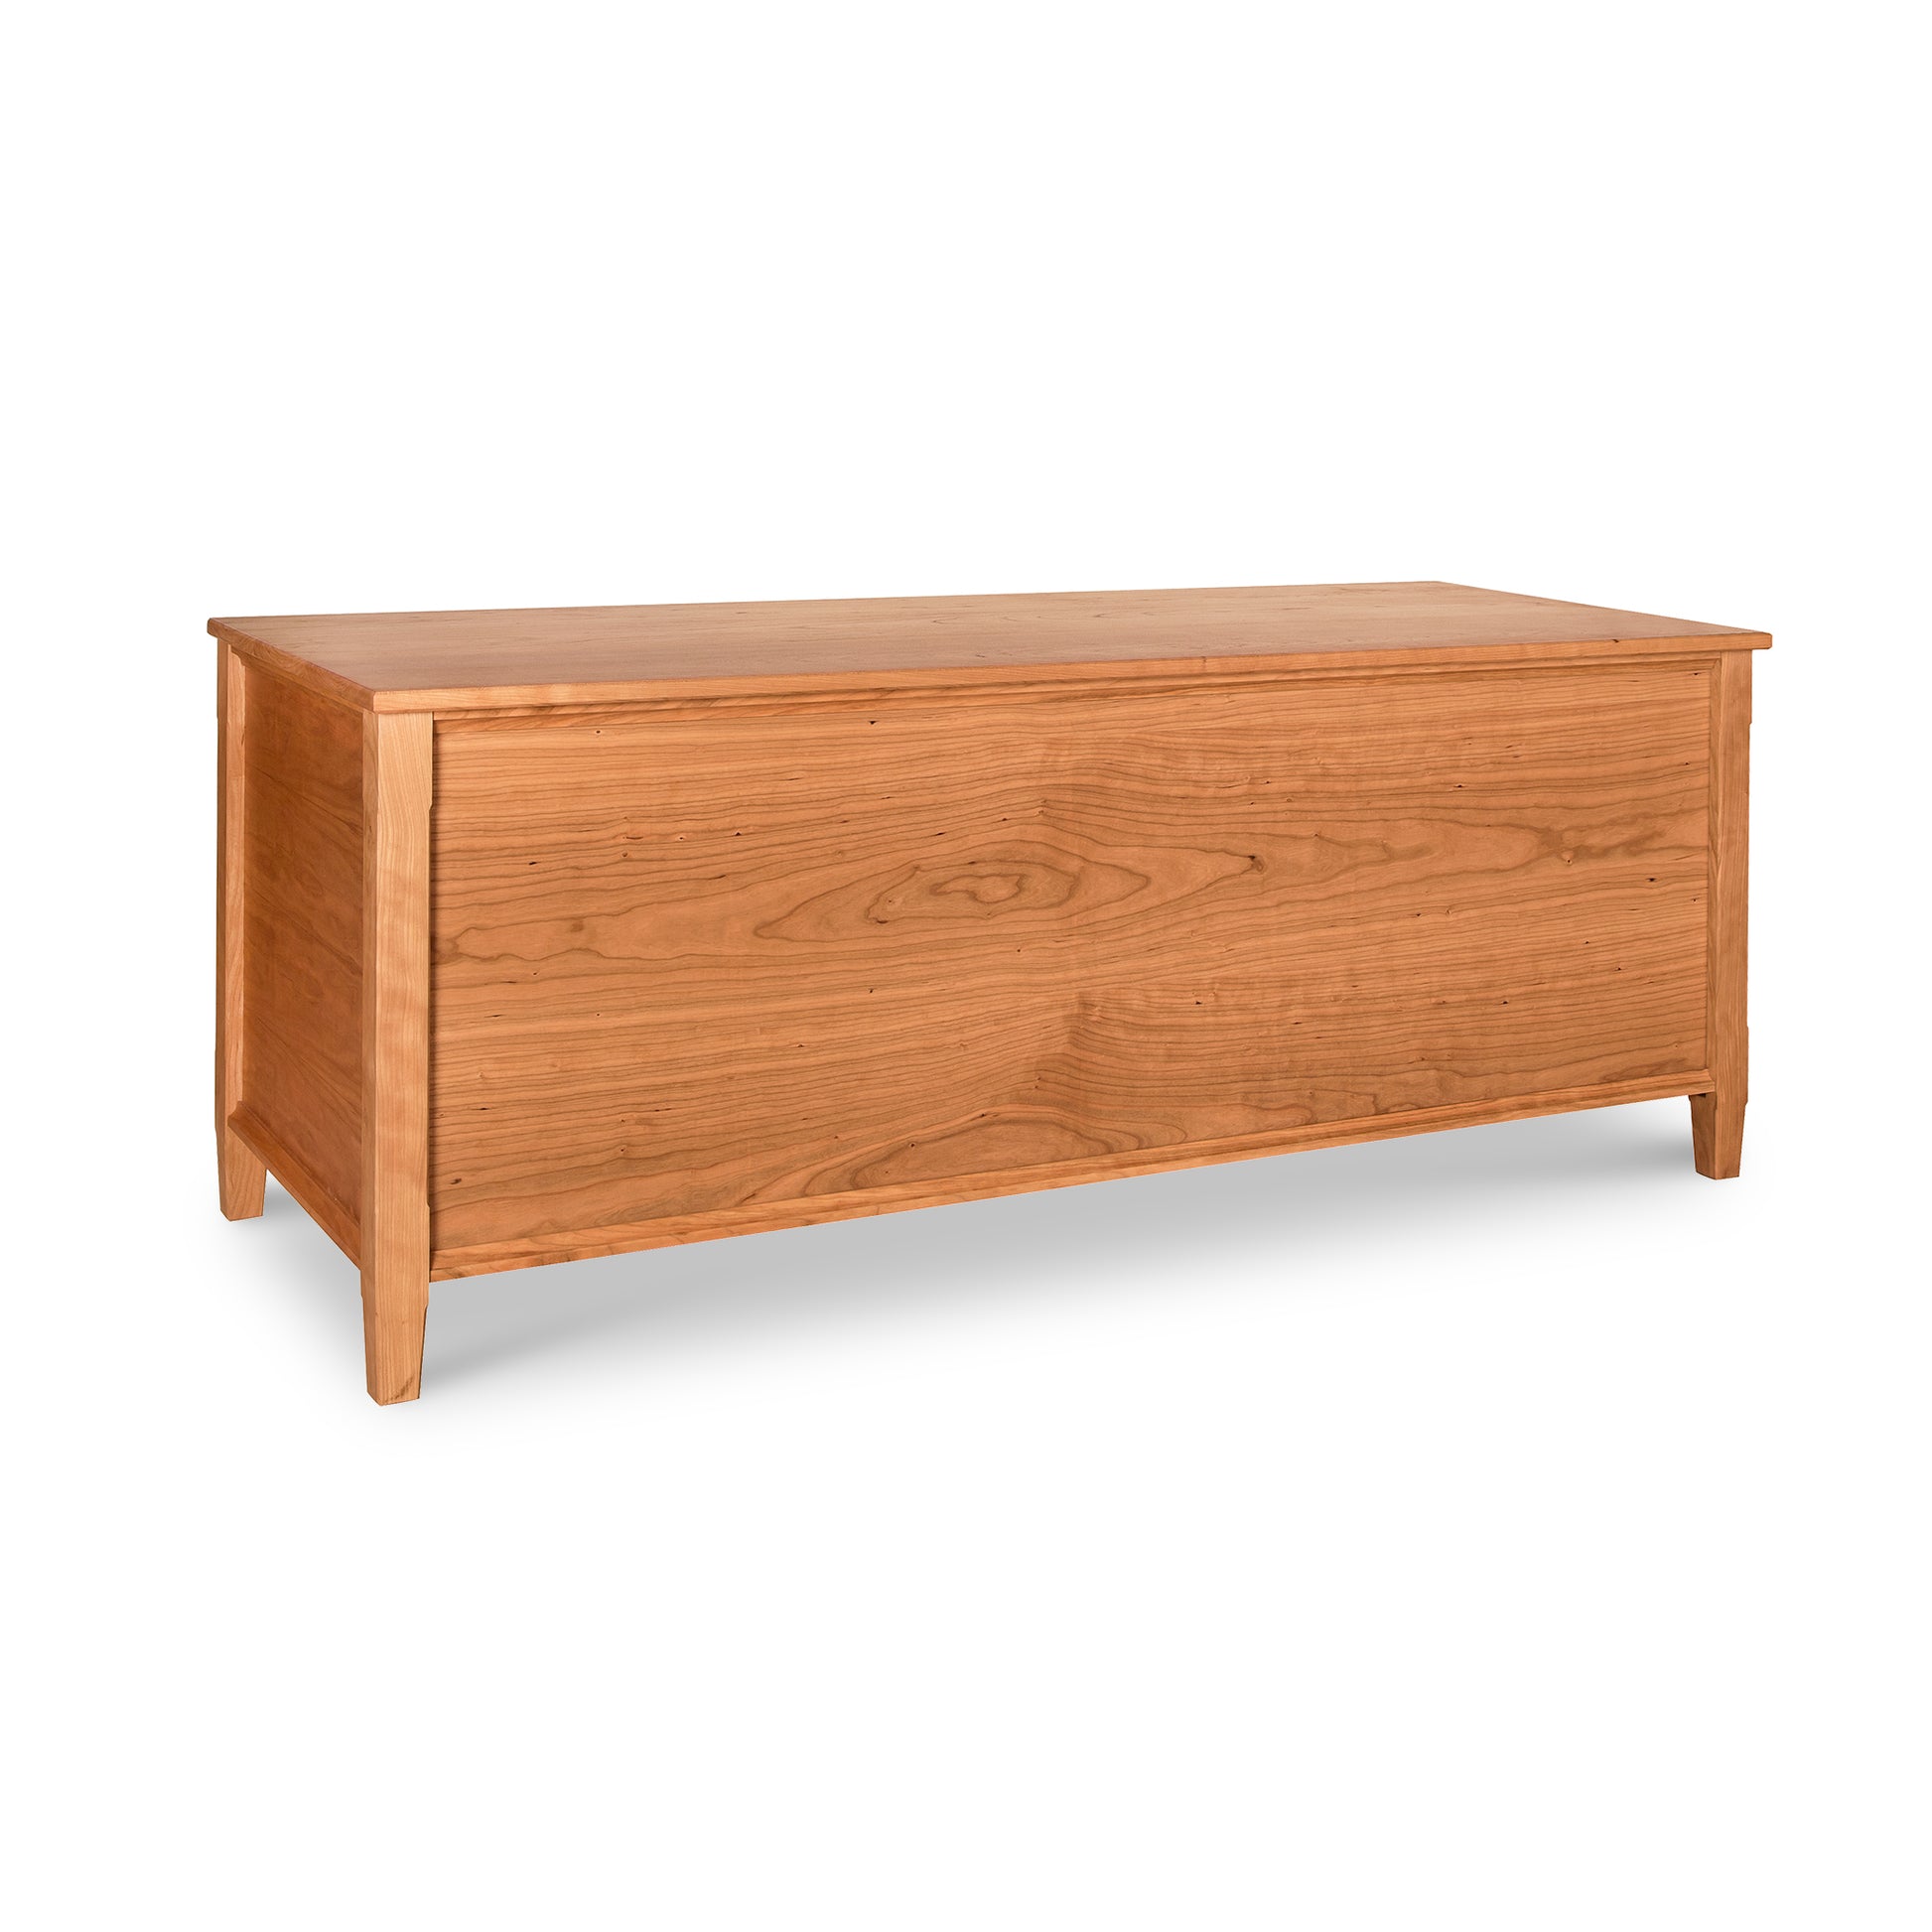 The Maple Corner Woodworks Vermont Shaker Blanket Chest, a luxury and eco-friendly wooden storage chest, showcased against a serene white background.